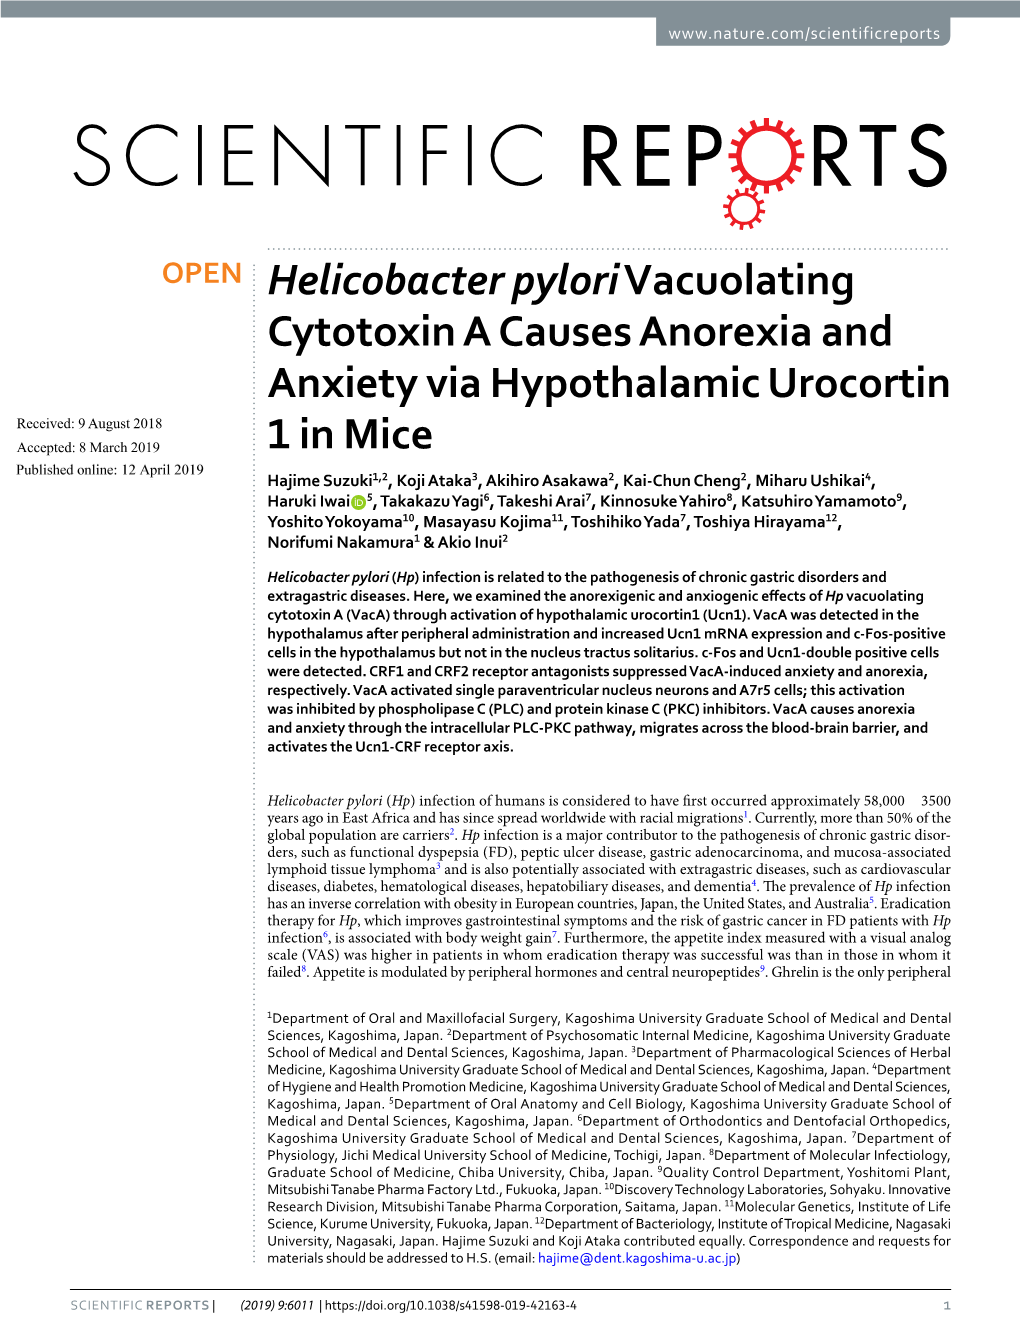 Helicobacter Pylori Vacuolating Cytotoxin a Causes Anorexia And